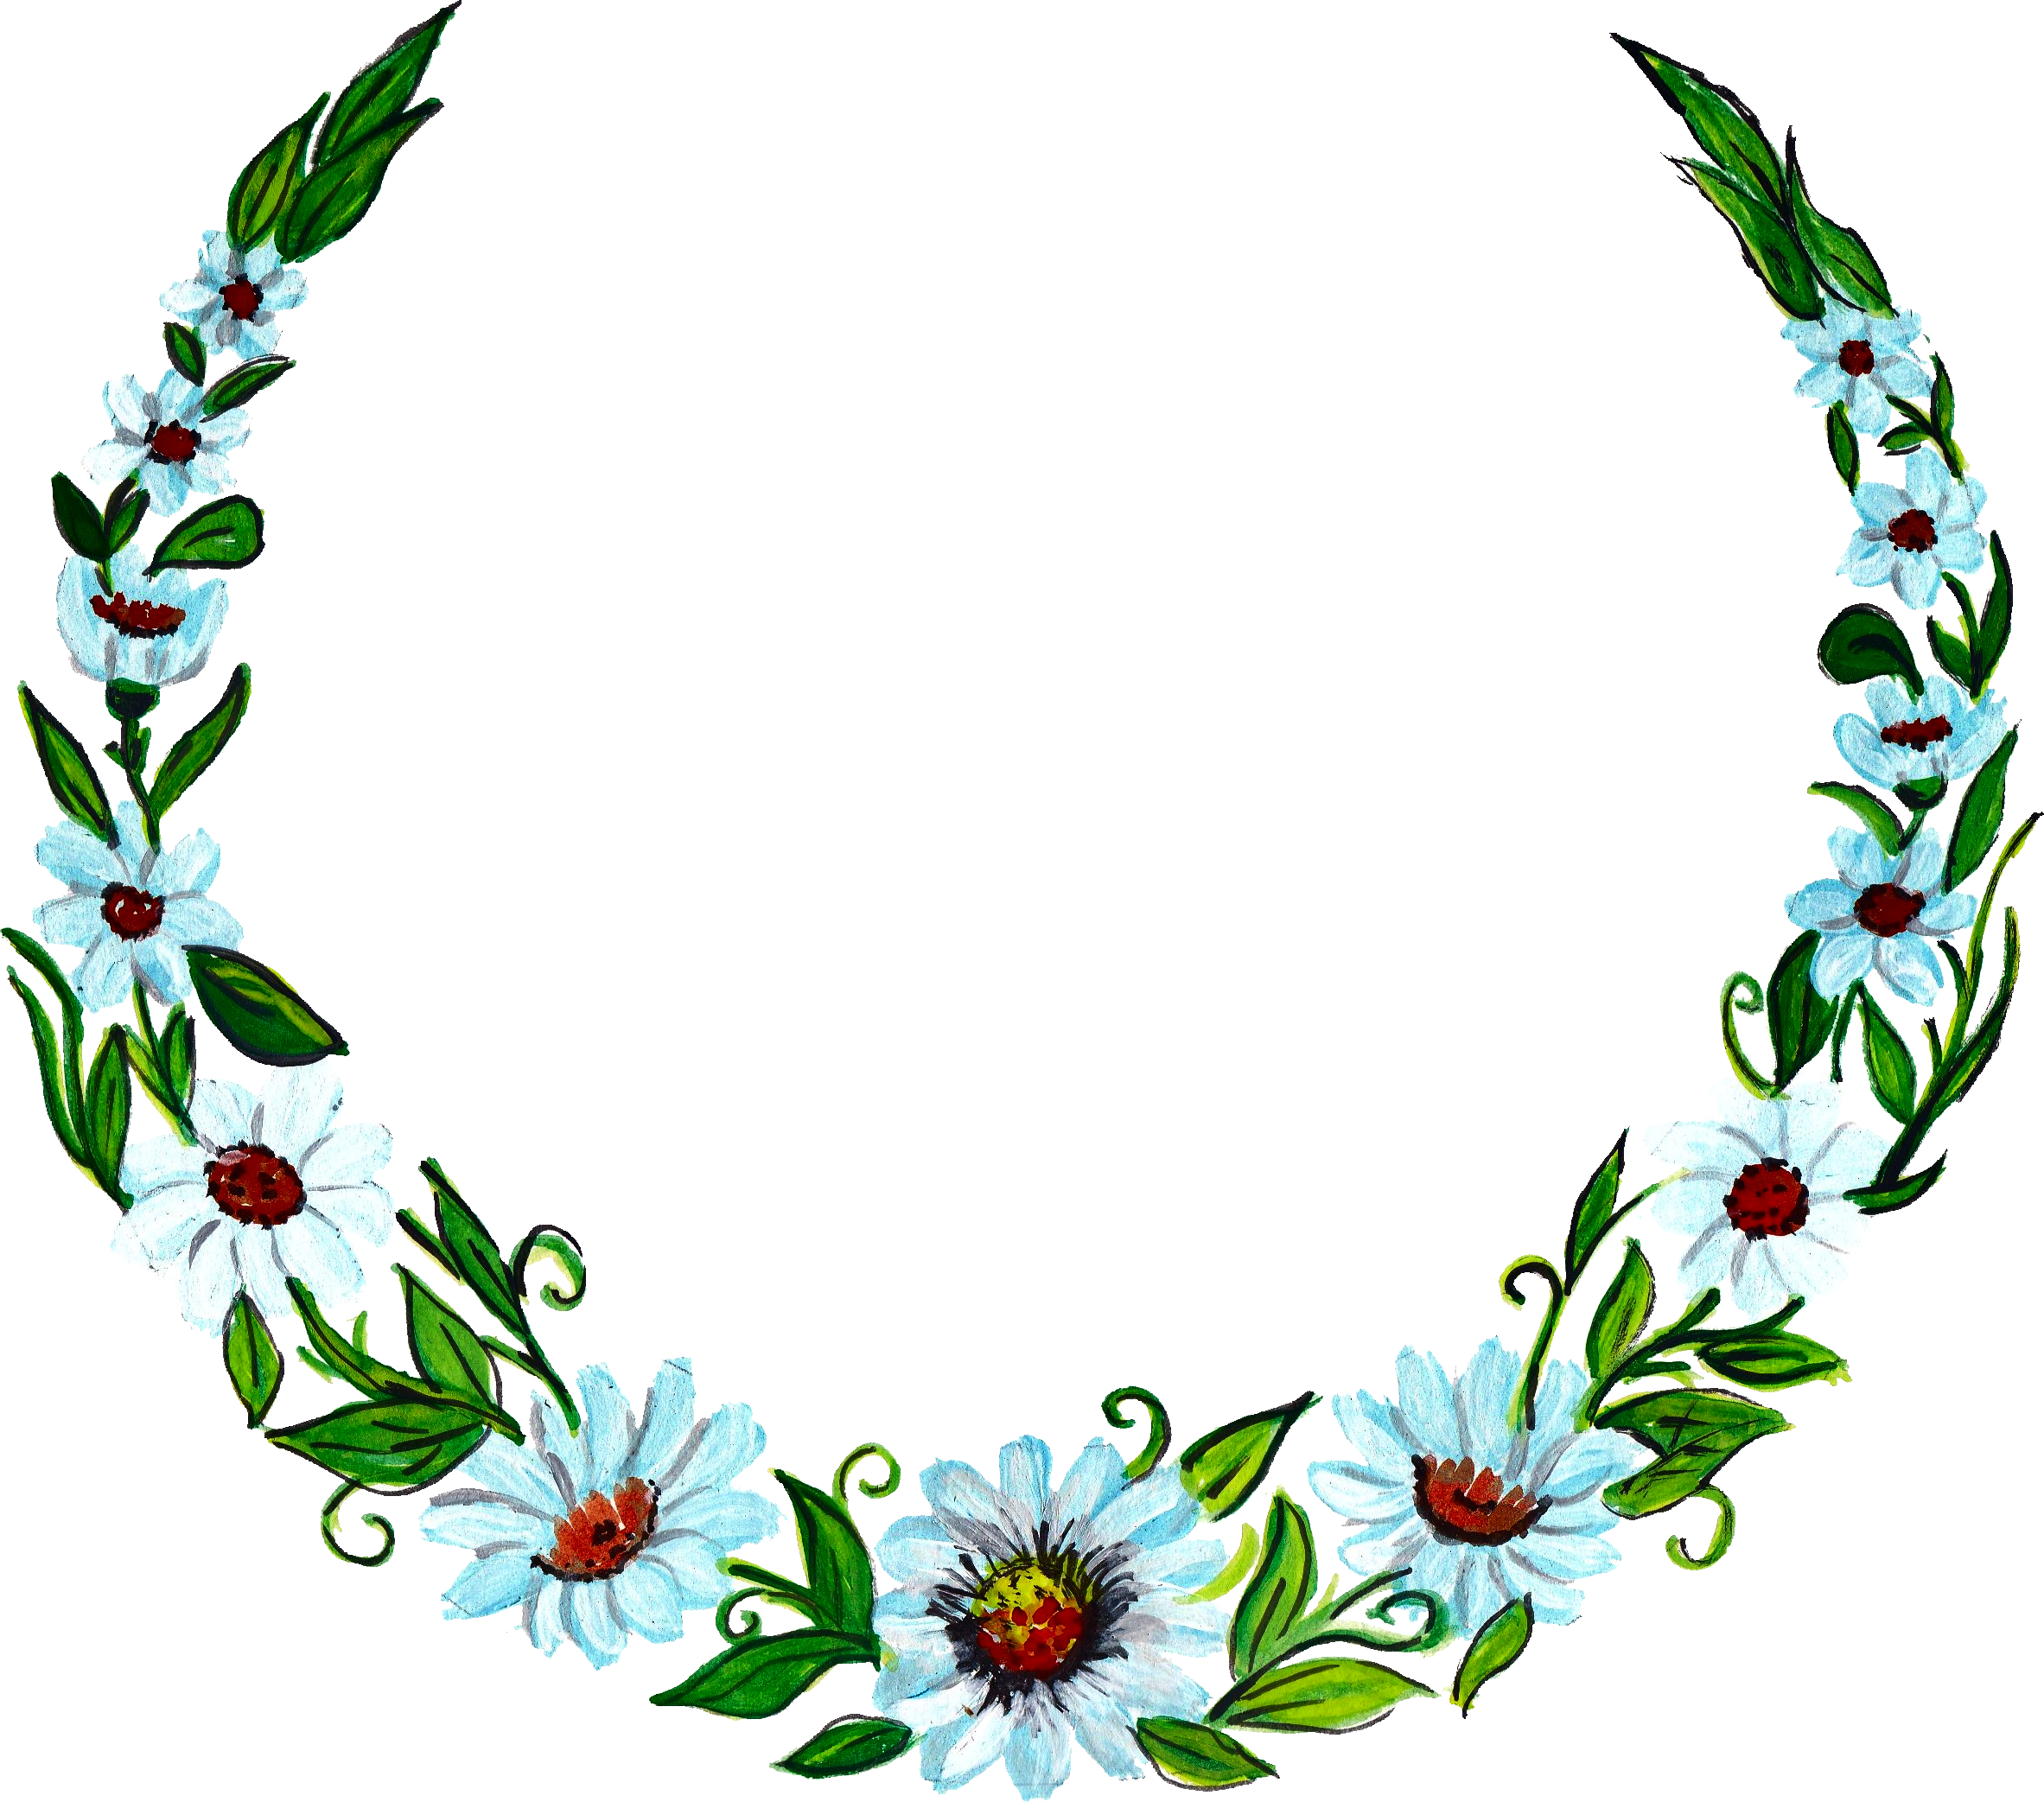 Blue Flower Wreath PNG Clipart Background